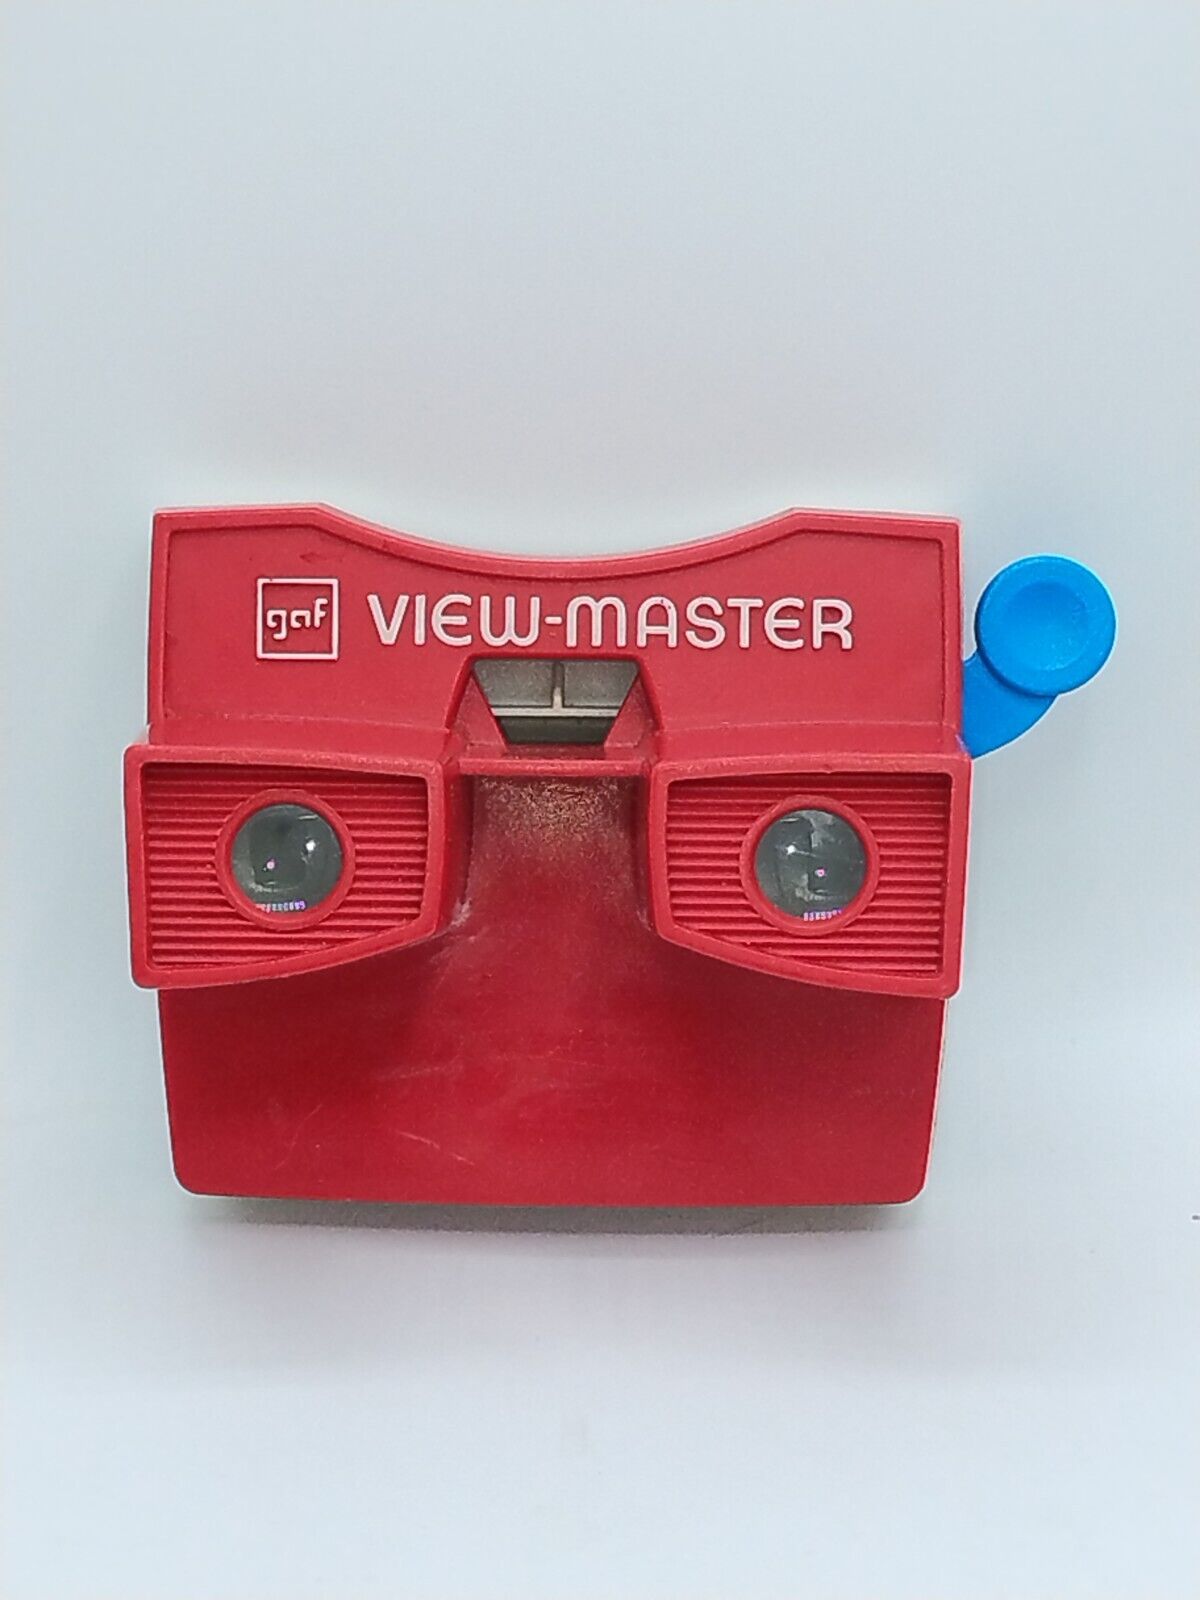 Vintage 1970’s GAF View-Master Viewer Red & White VTG Toy Stereoscope